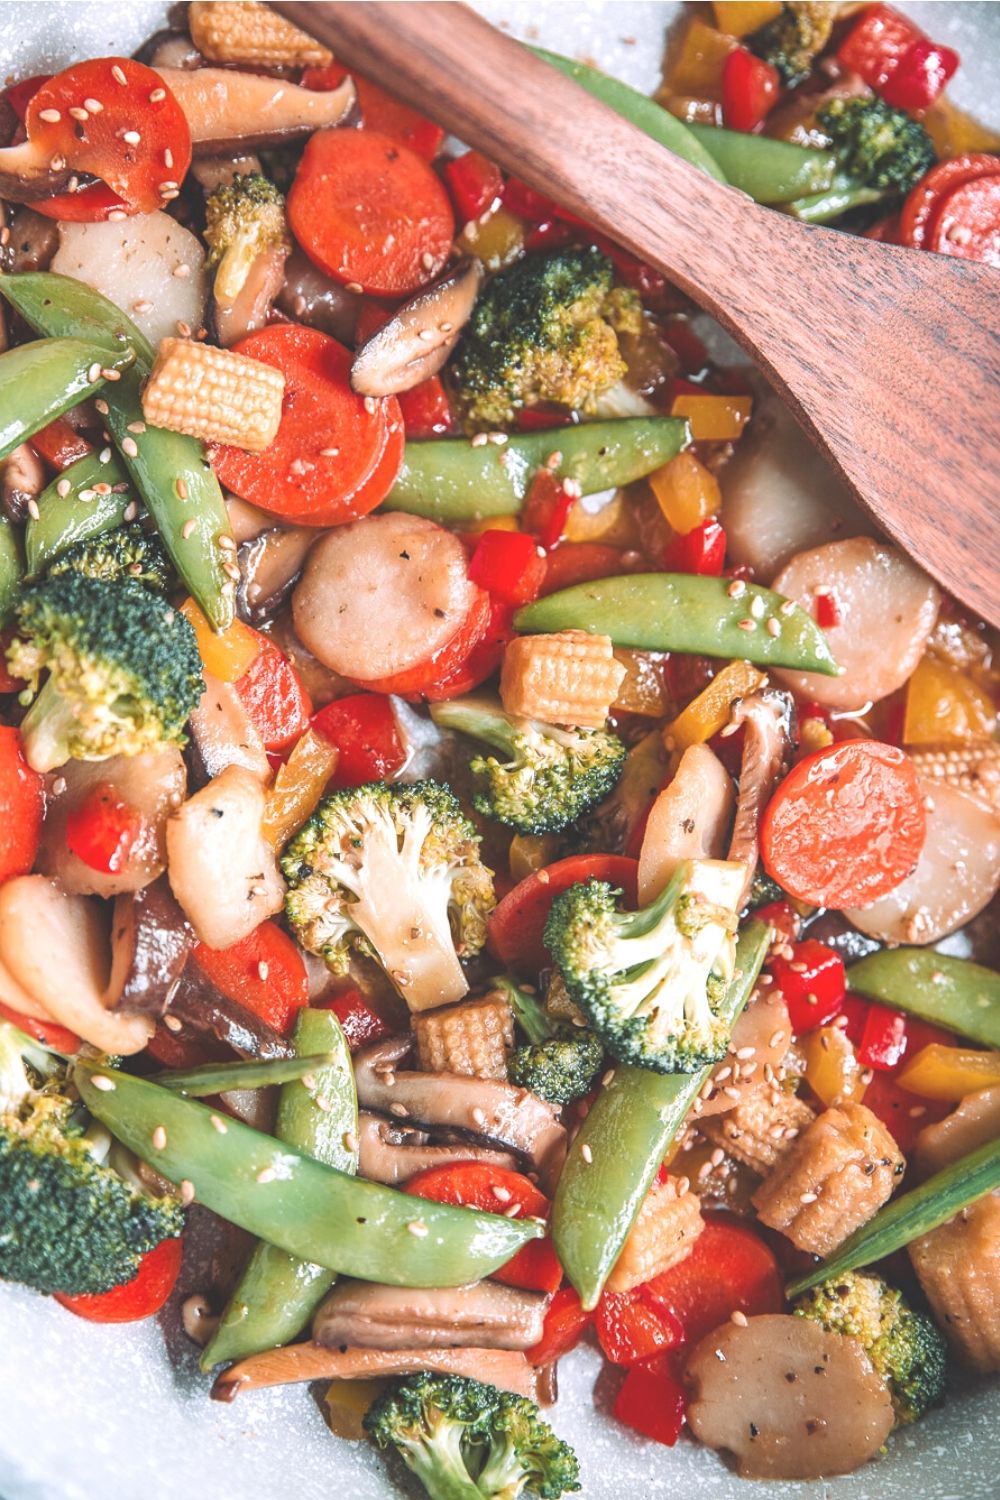 Shiitake Ginger Stir Fry| Quick and easy weeknight dinner made with fresh vegetables and full of flavor with Drew's Organics Shiitake Ginger Dressing and Marinade-by Mash & Spread. #recipe #food #stirfry #dinner #vegetables